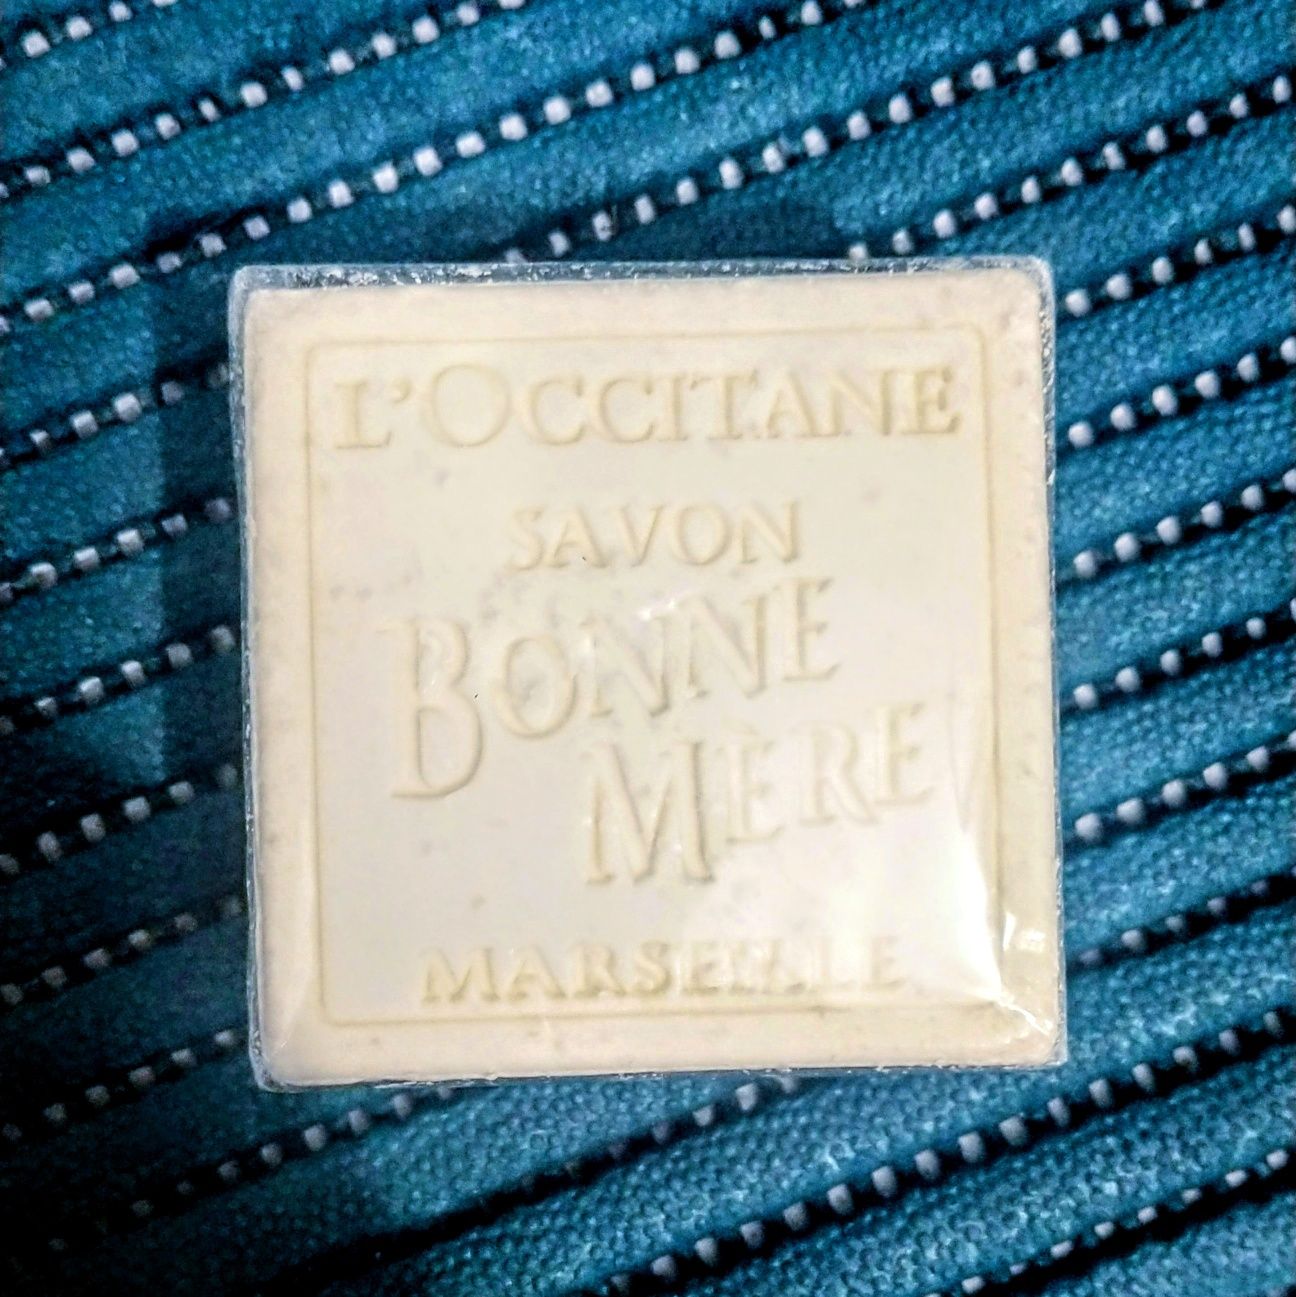 Mydło w kostce 100g L'OCCITANE Bonne Mere - Made in France.

MARSEGALE